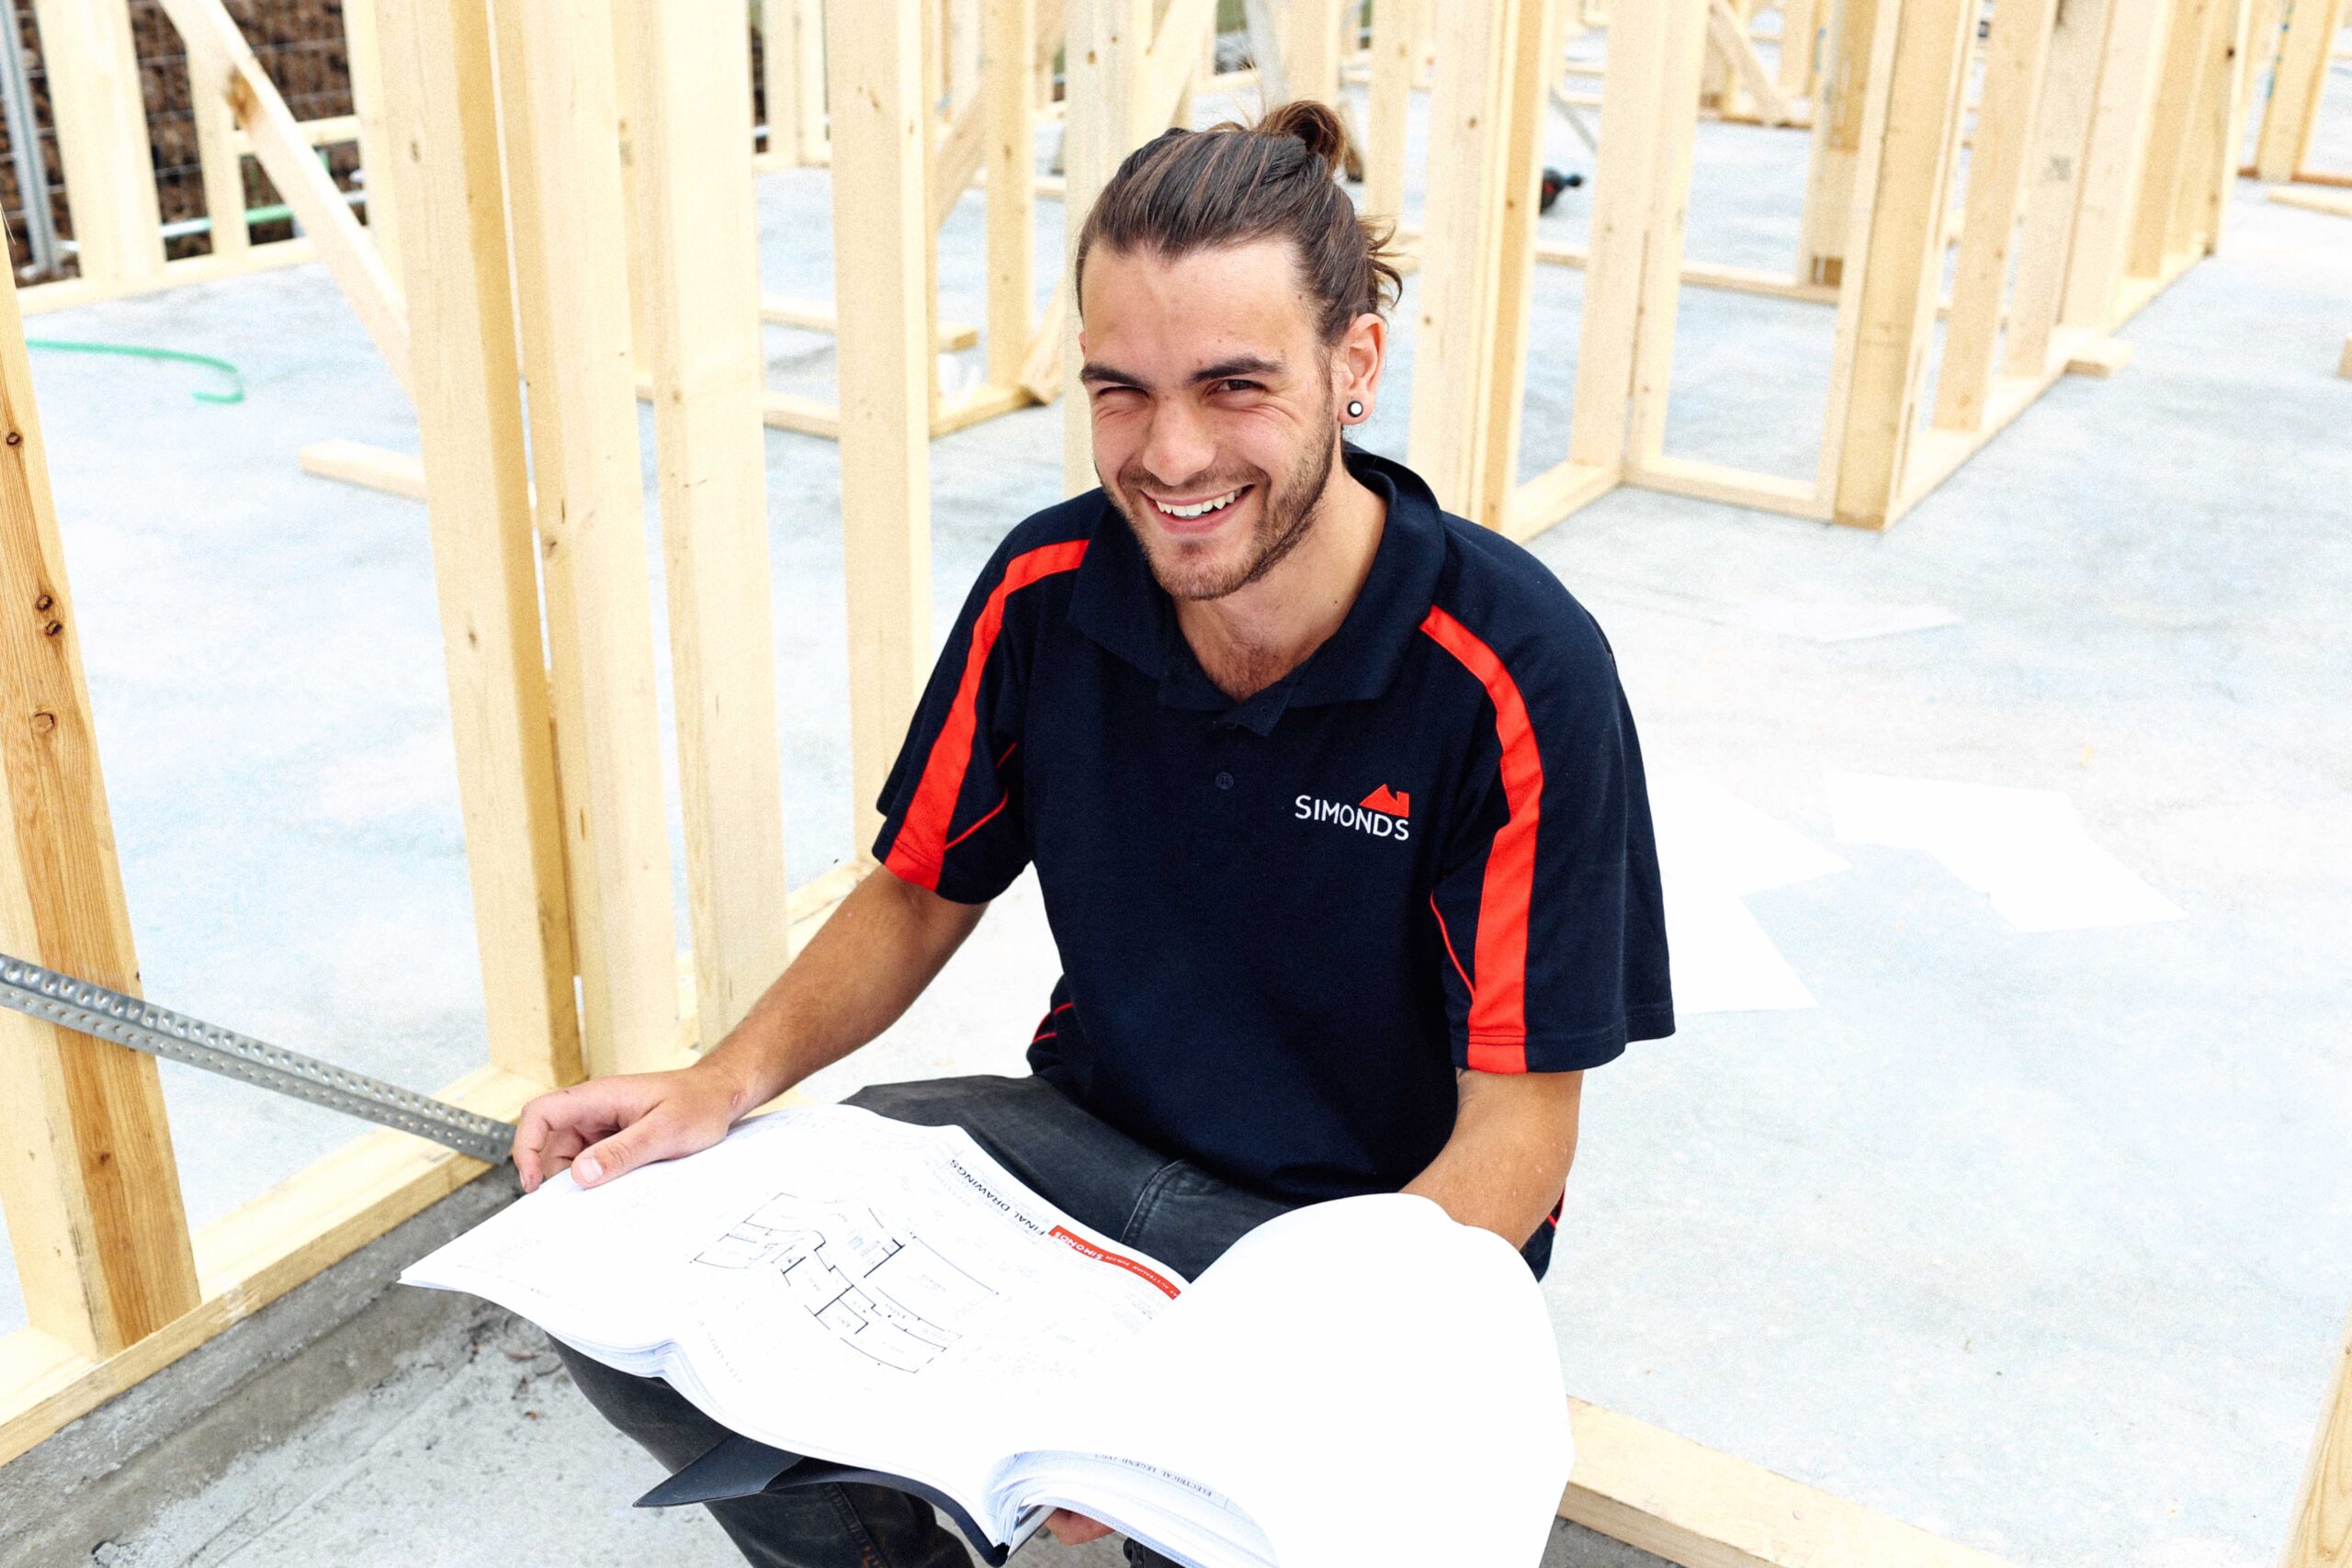 MEET SHANNON: BUILDERS ACADEMY GRADUATE AND SITE SUPERVISOR